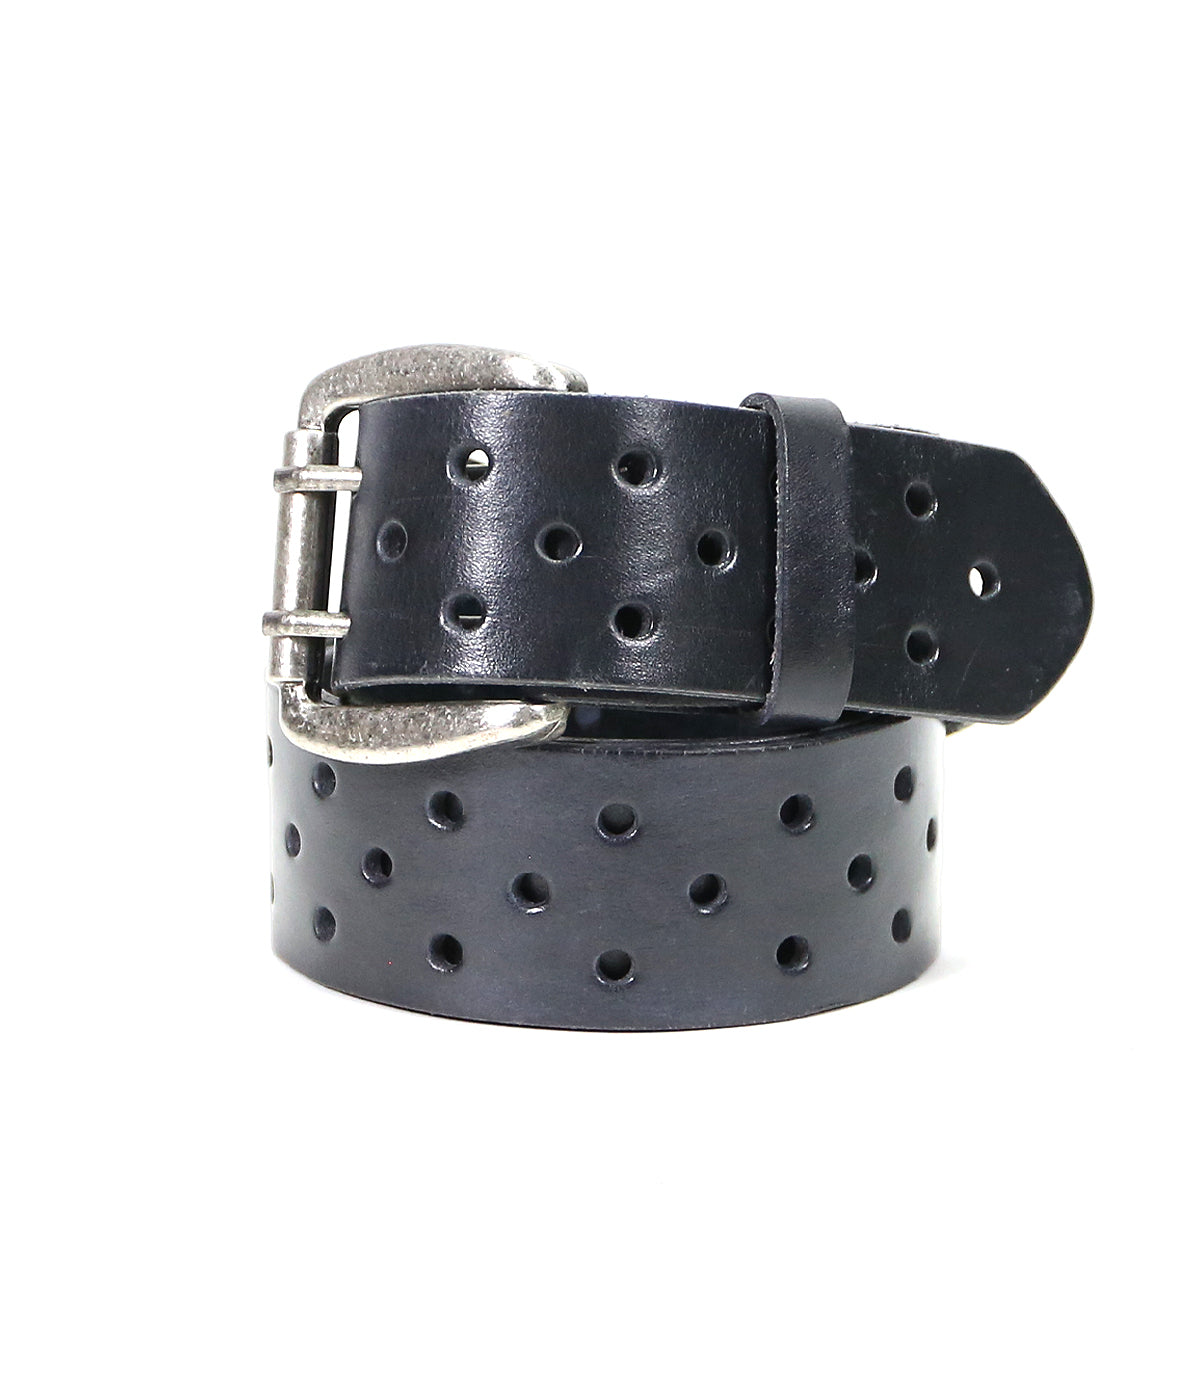 Black Mccoy vegetable-tanned leather belt with perforations and a silver buckle, coiled neatly on a white background by Bed Stu.